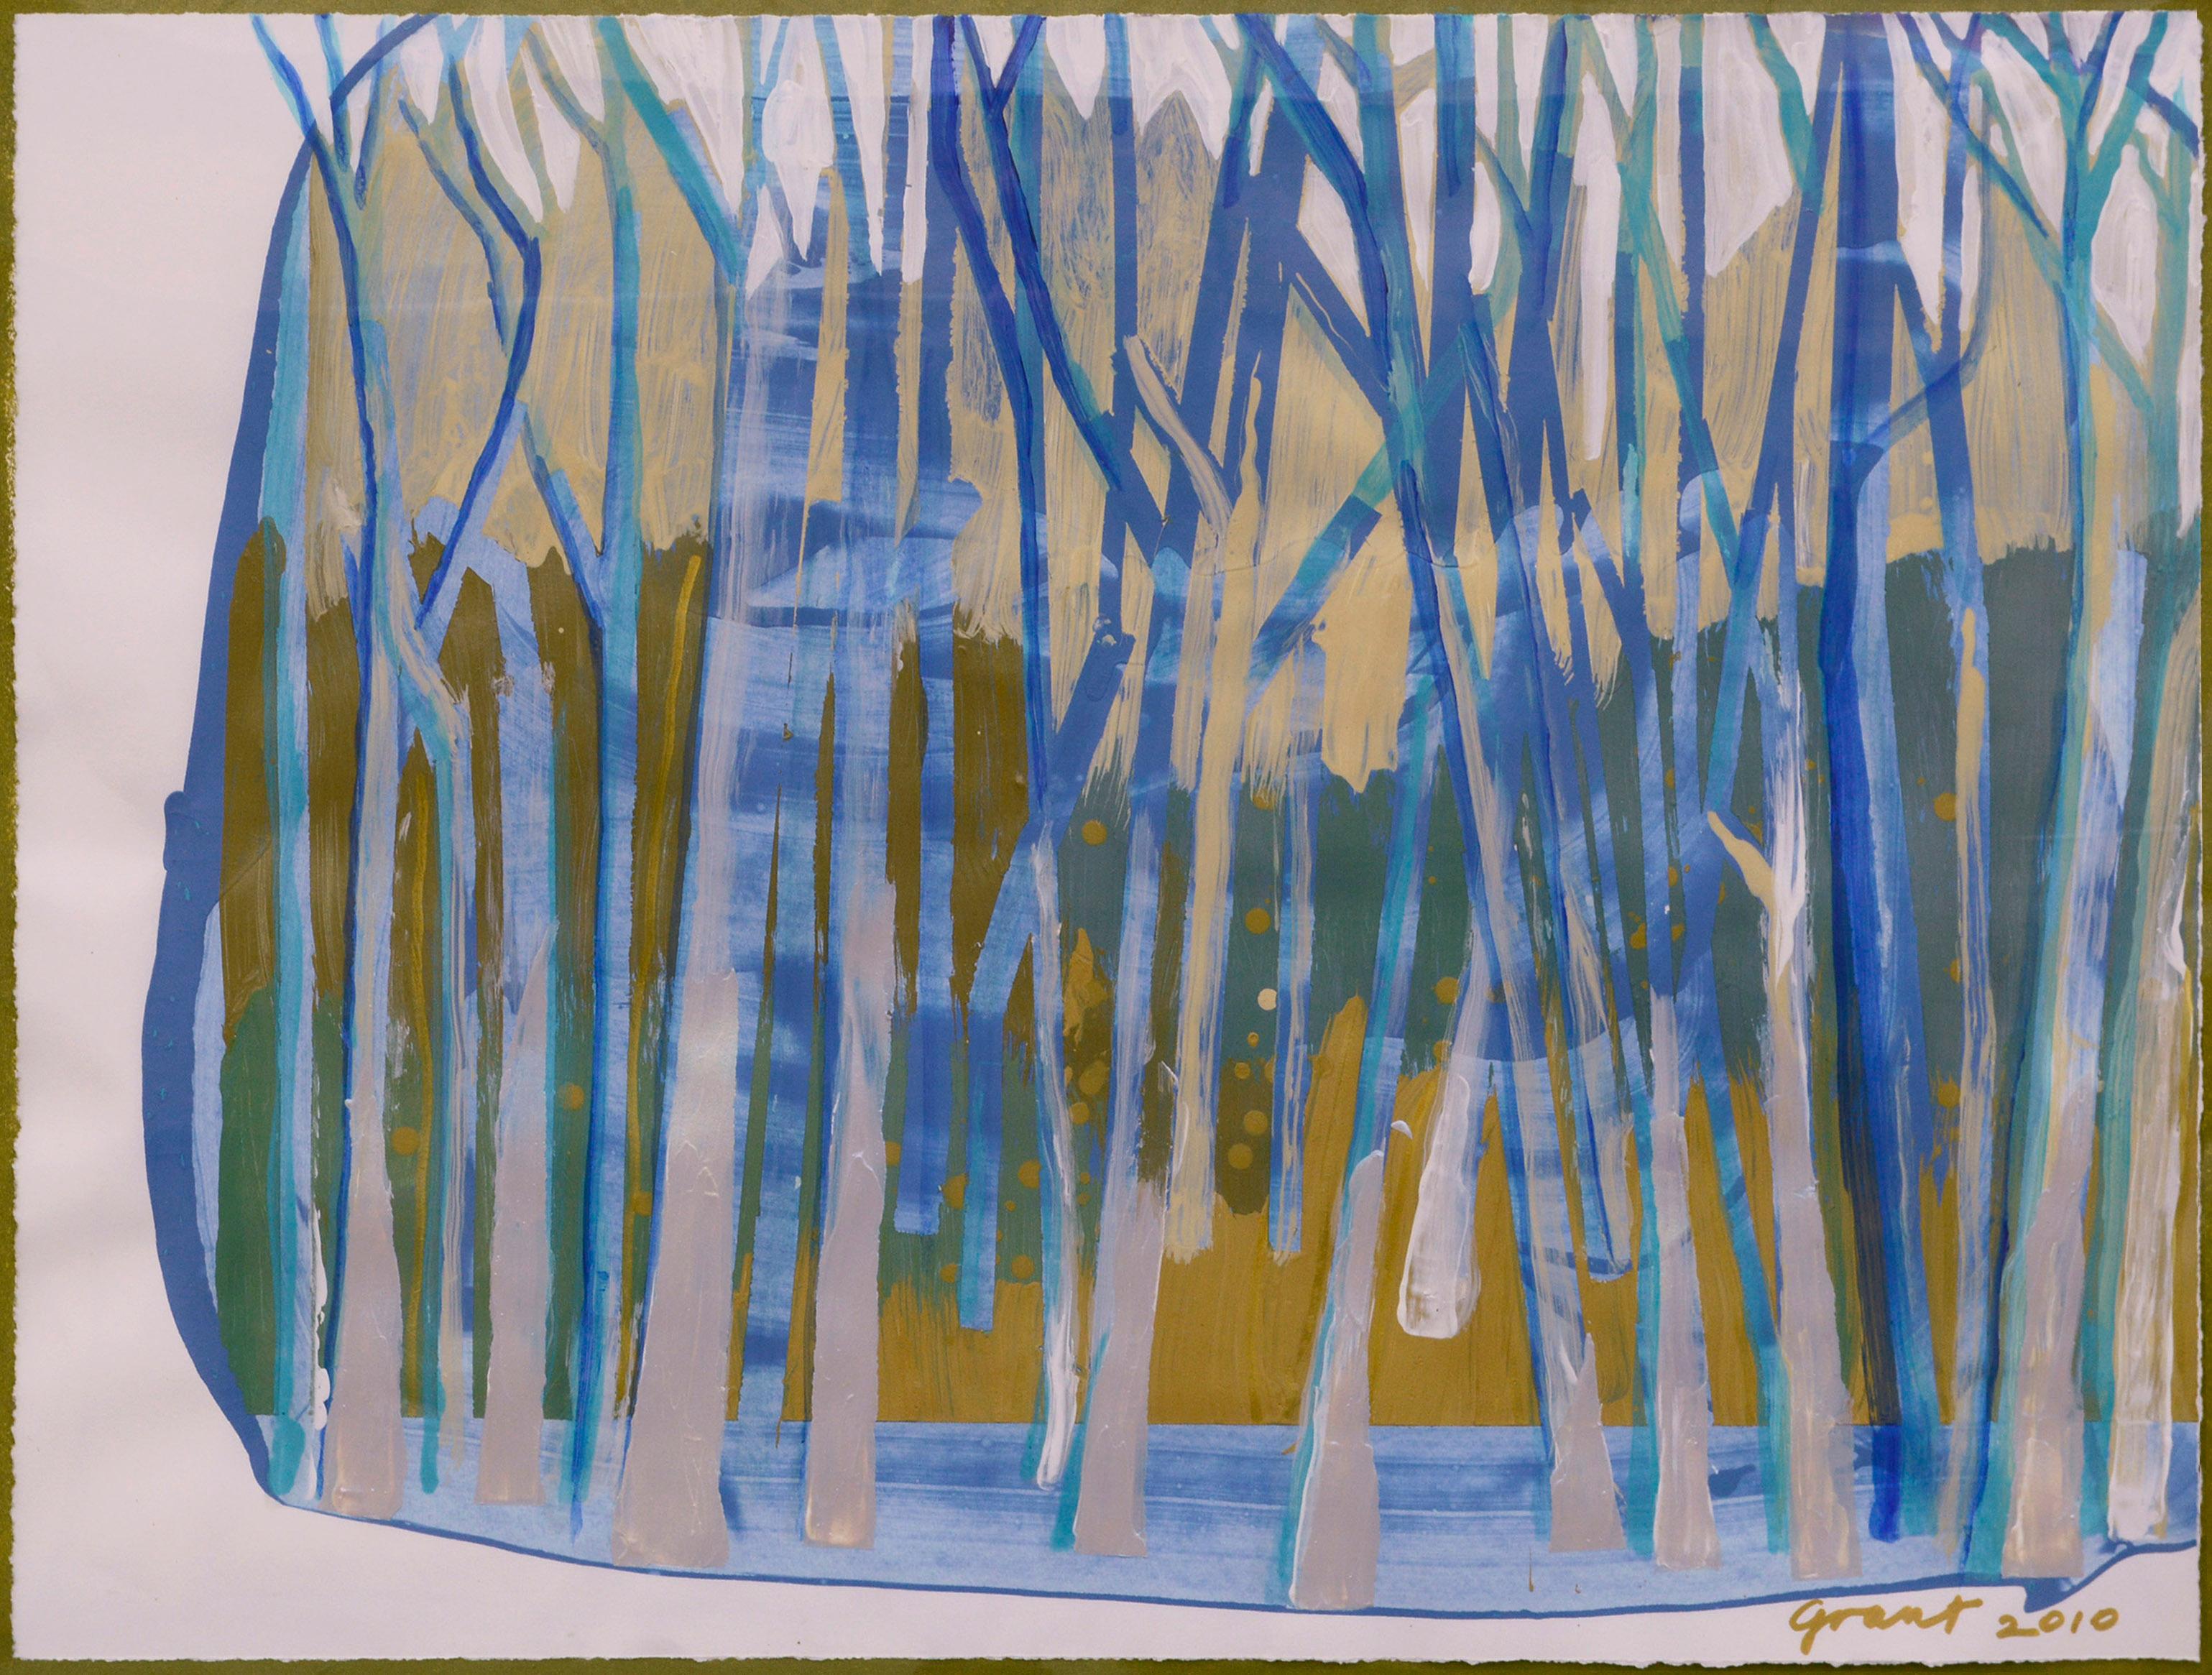 Blue Trees, Large-Scale Contemporary Abstract Forest Landscape  - Painting by Marc Foster Grant